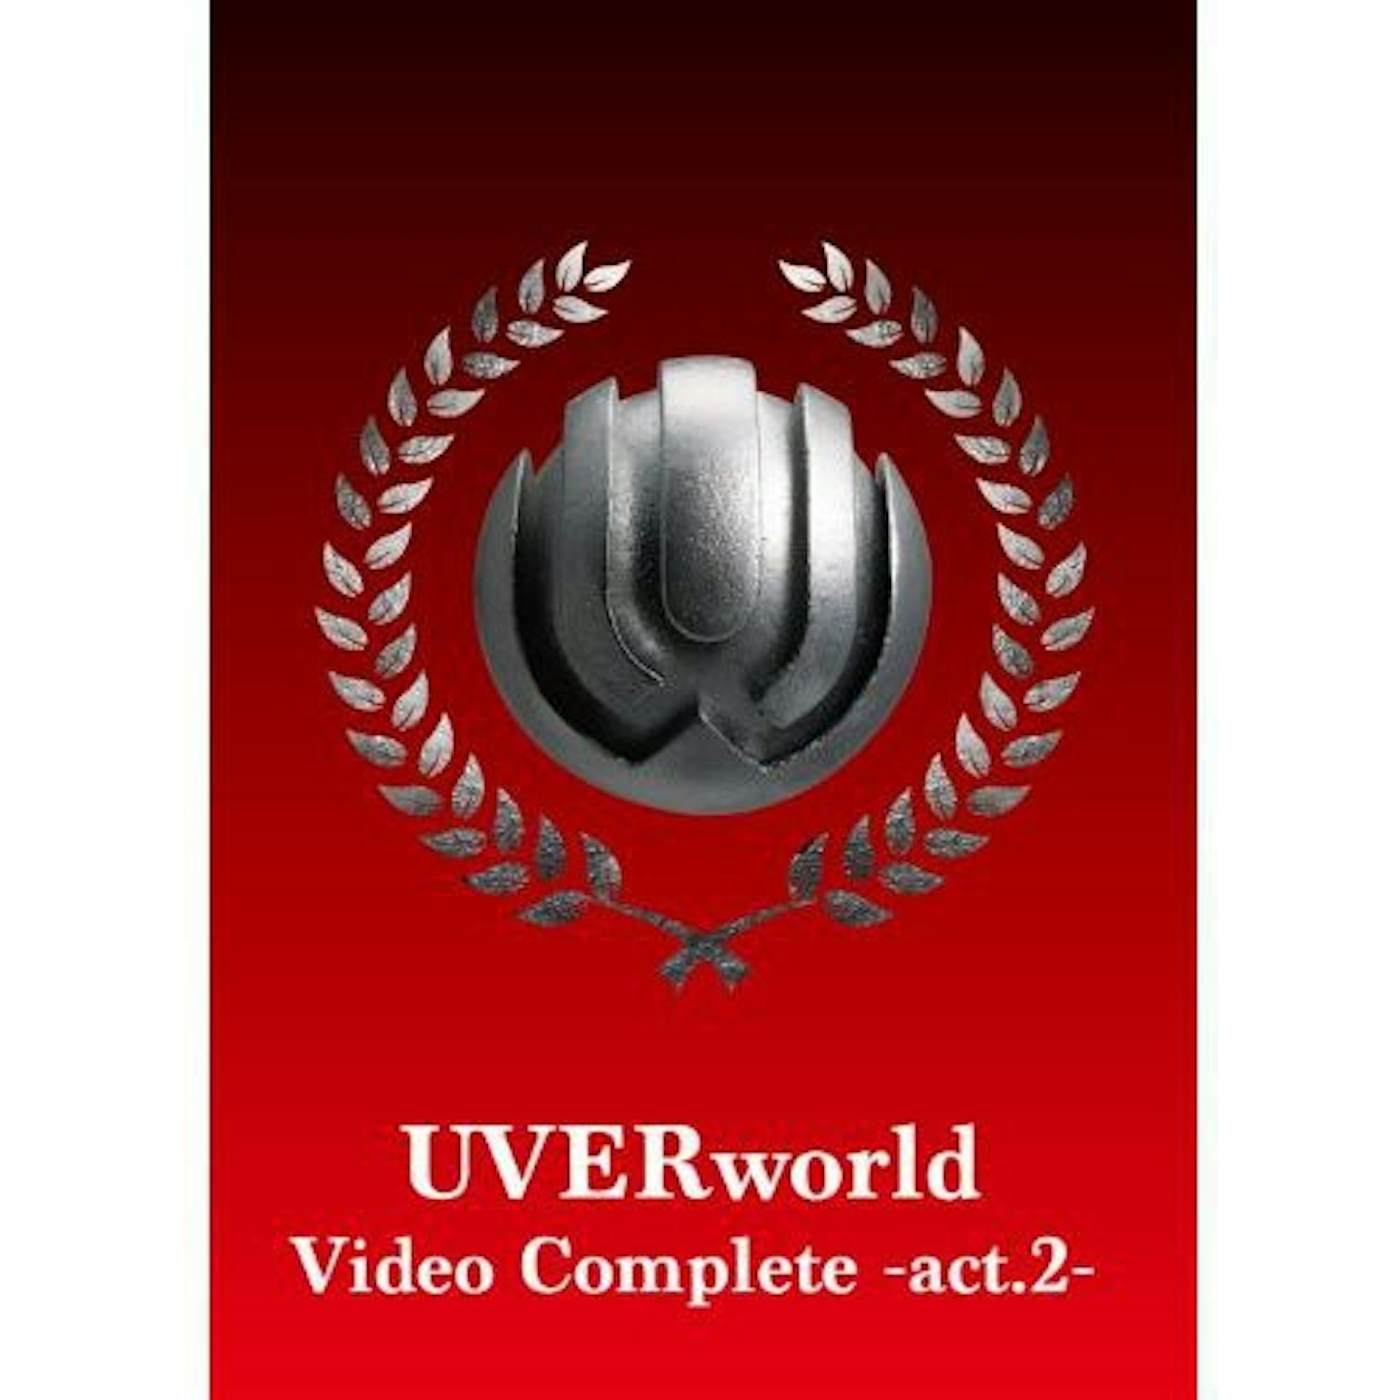 UVERworld VIDEO COMPLETE-ACT.2 DVD